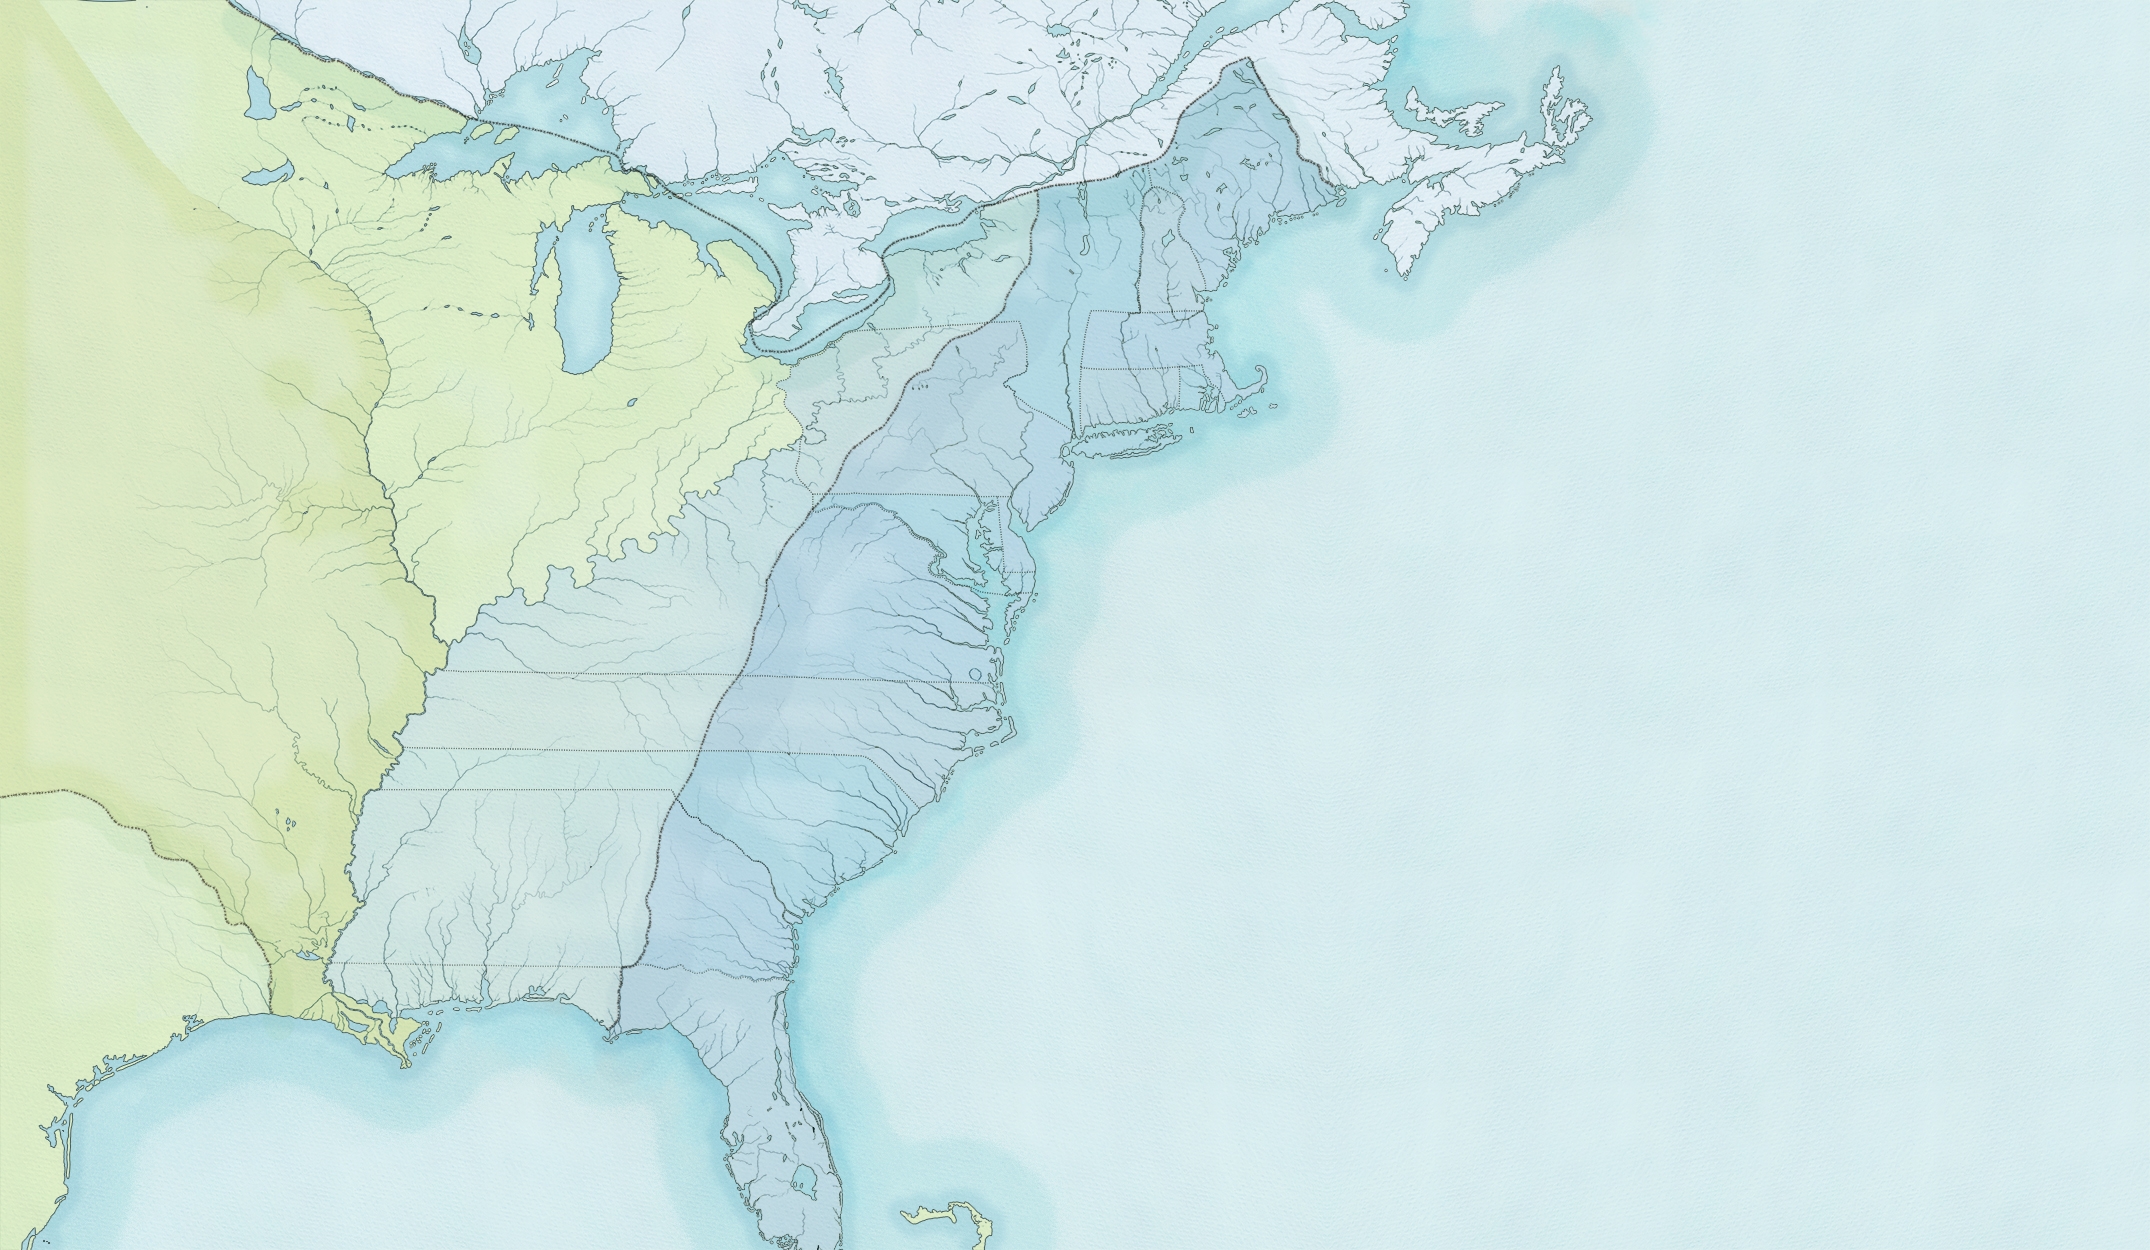 Illustrated map of colonial America